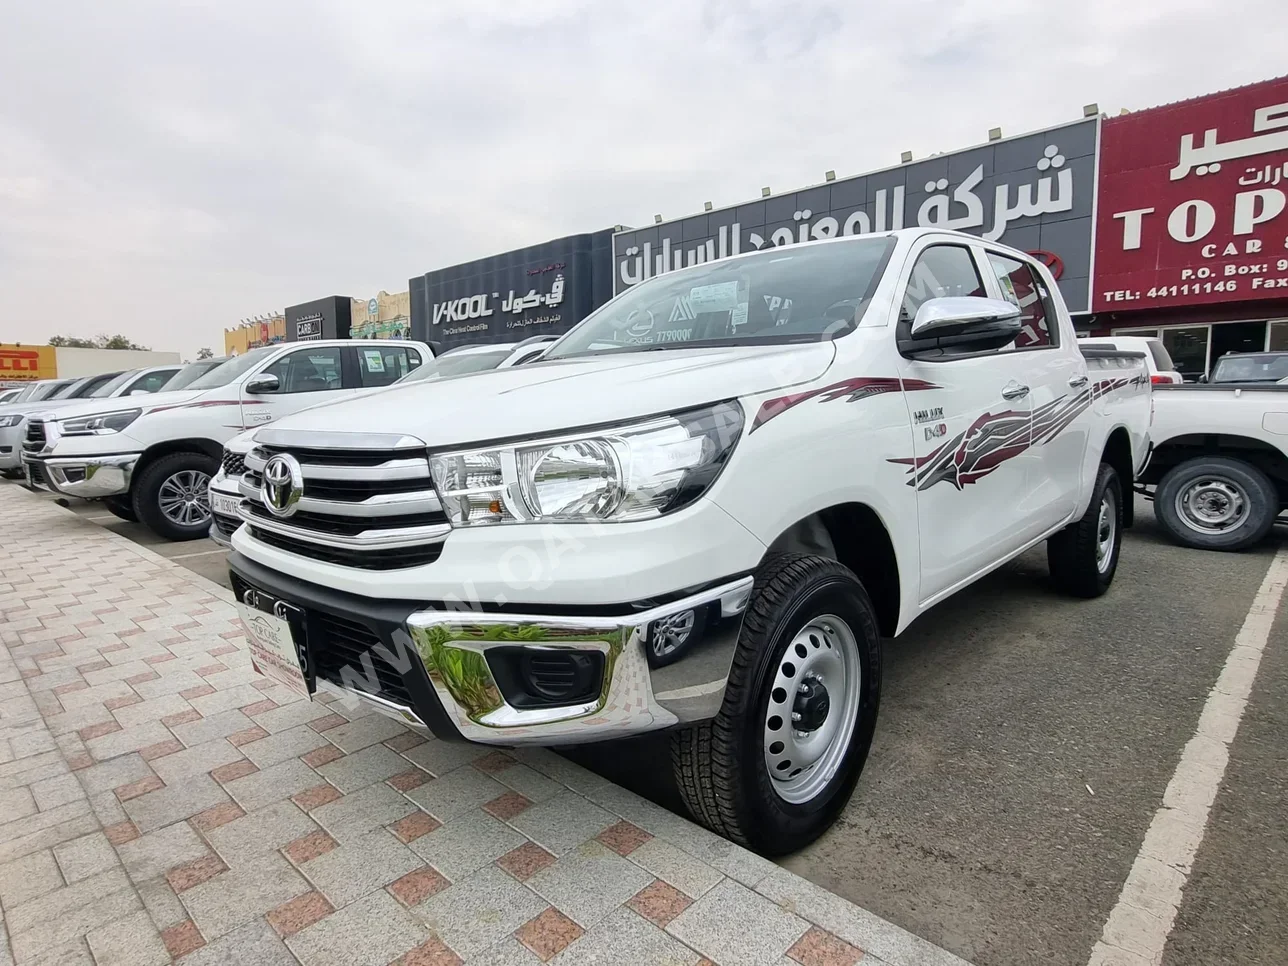 Toyota  Hilux  2024  Manual  0 Km  4 Cylinder  Four Wheel Drive (4WD)  Pick Up  White  With Warranty